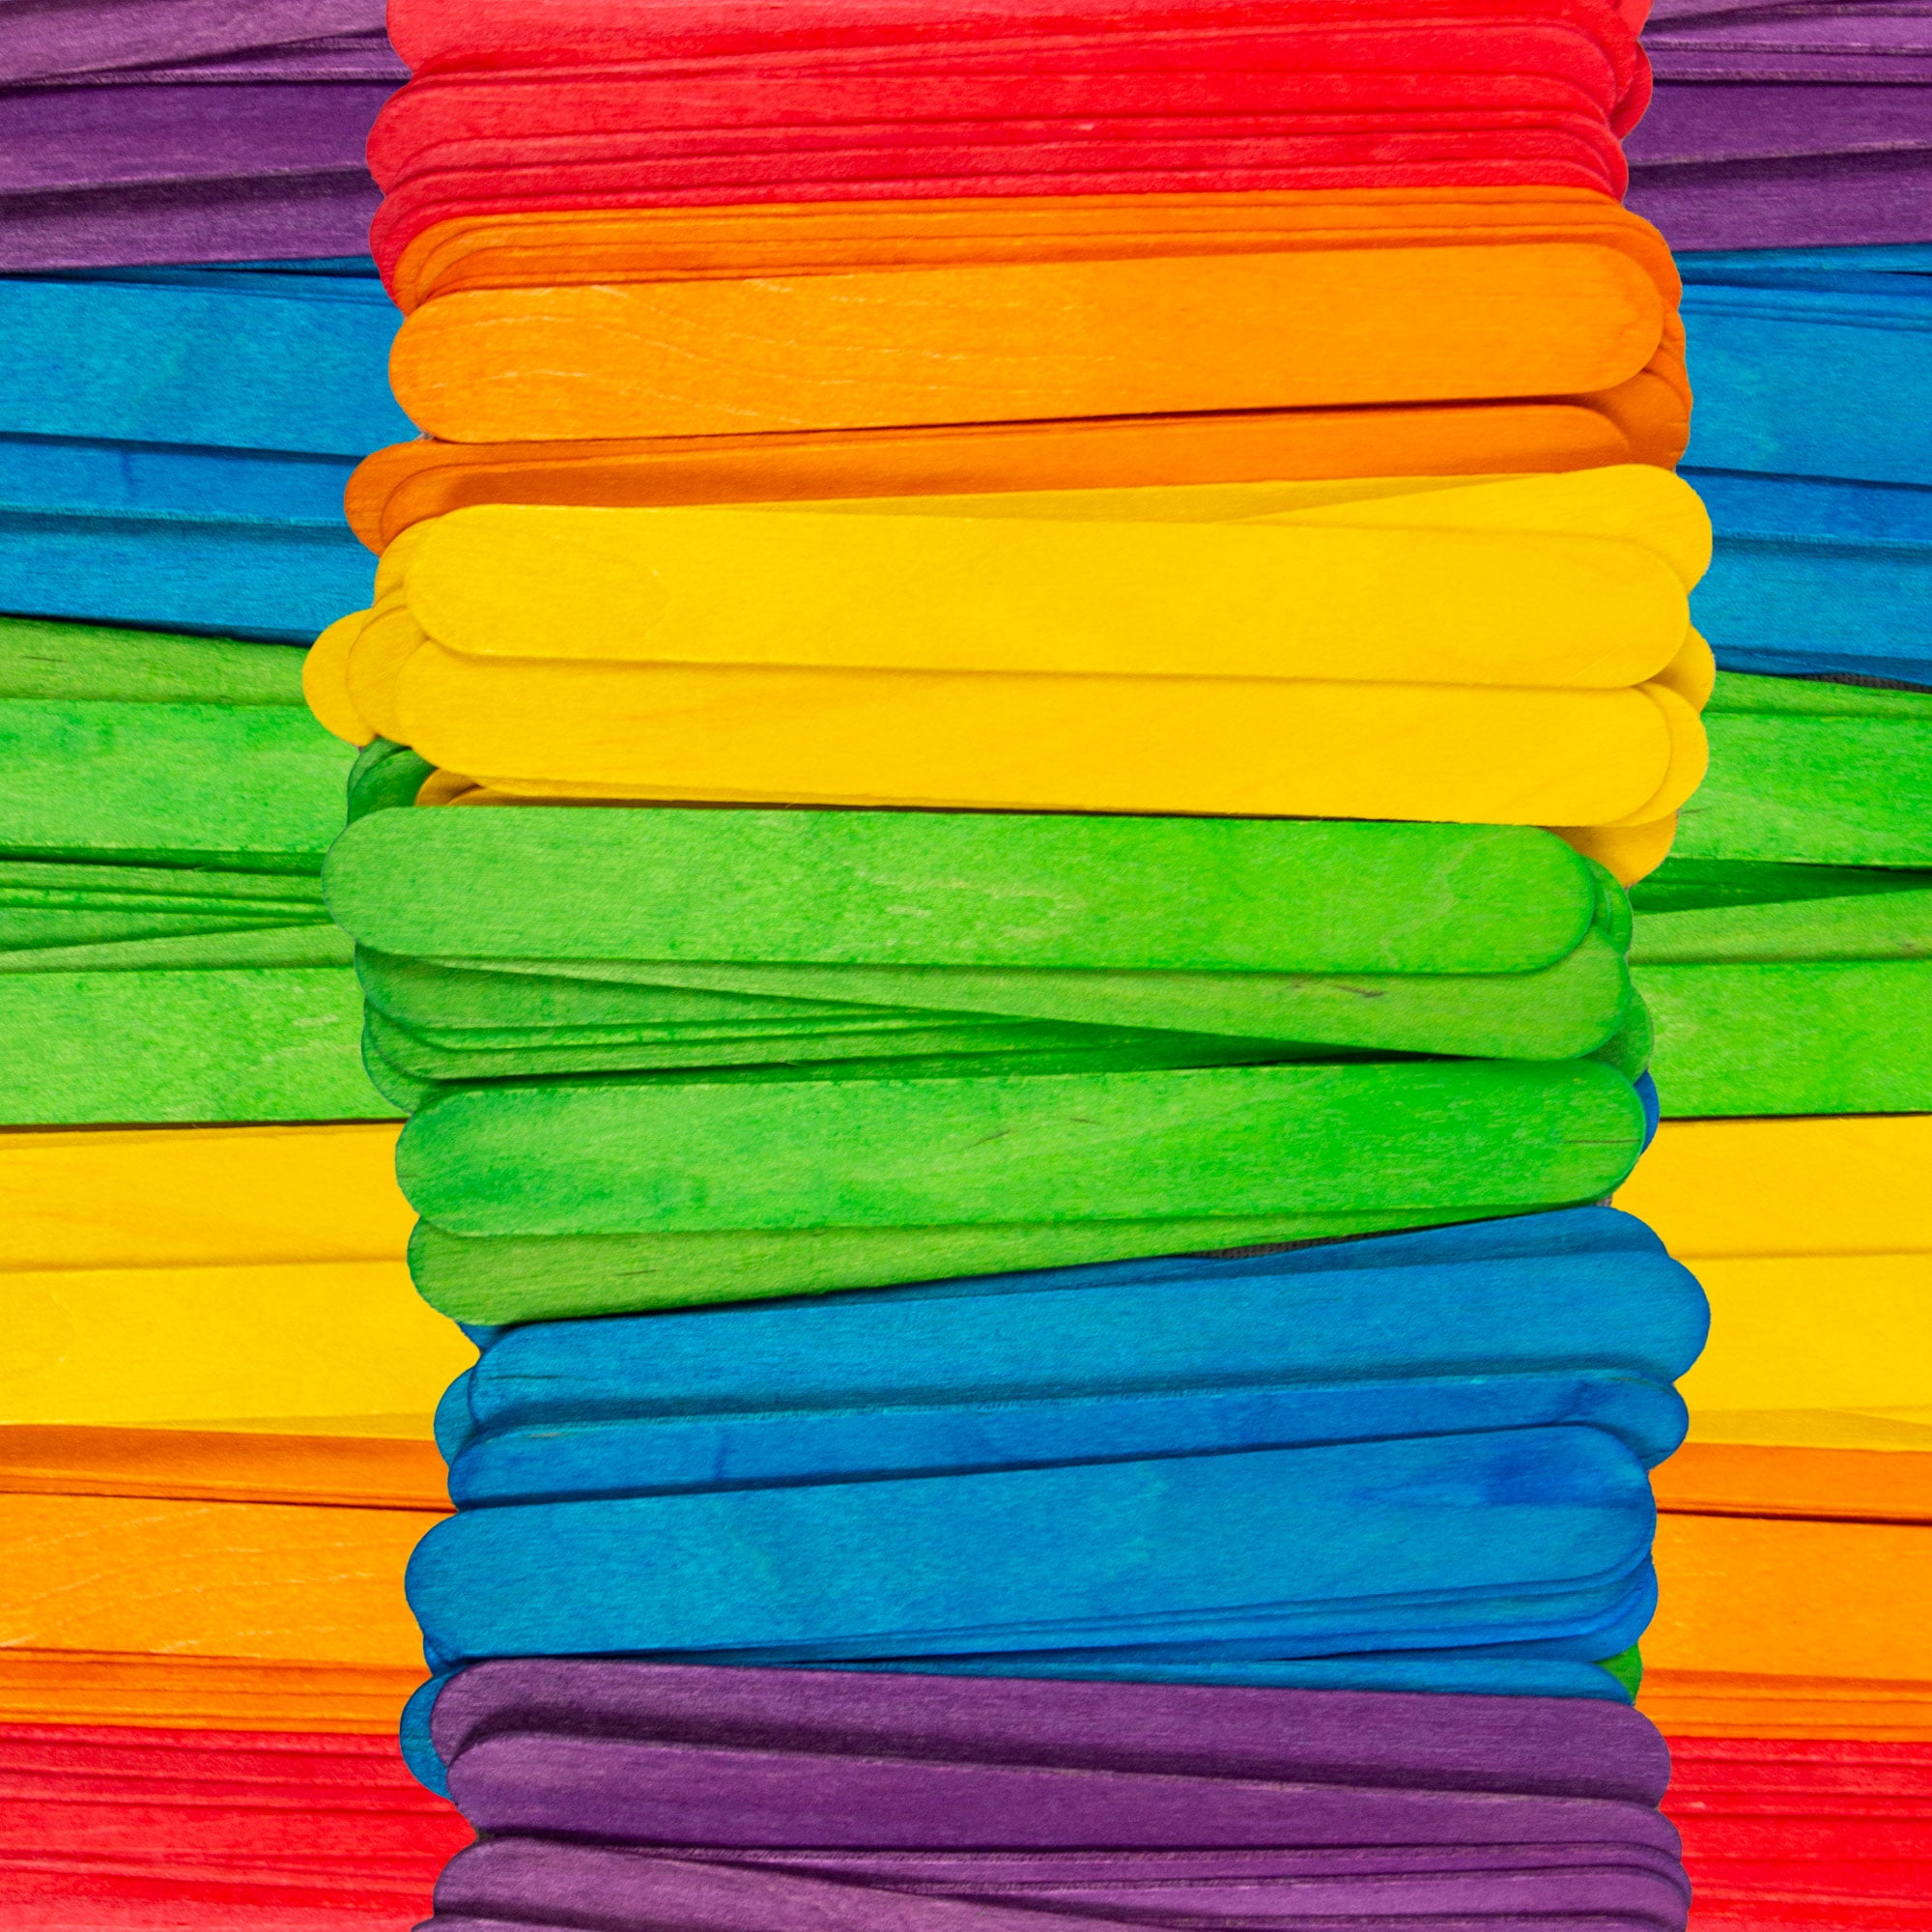 Simple full rainbow backdrop, colorful wooden popsicle sticks